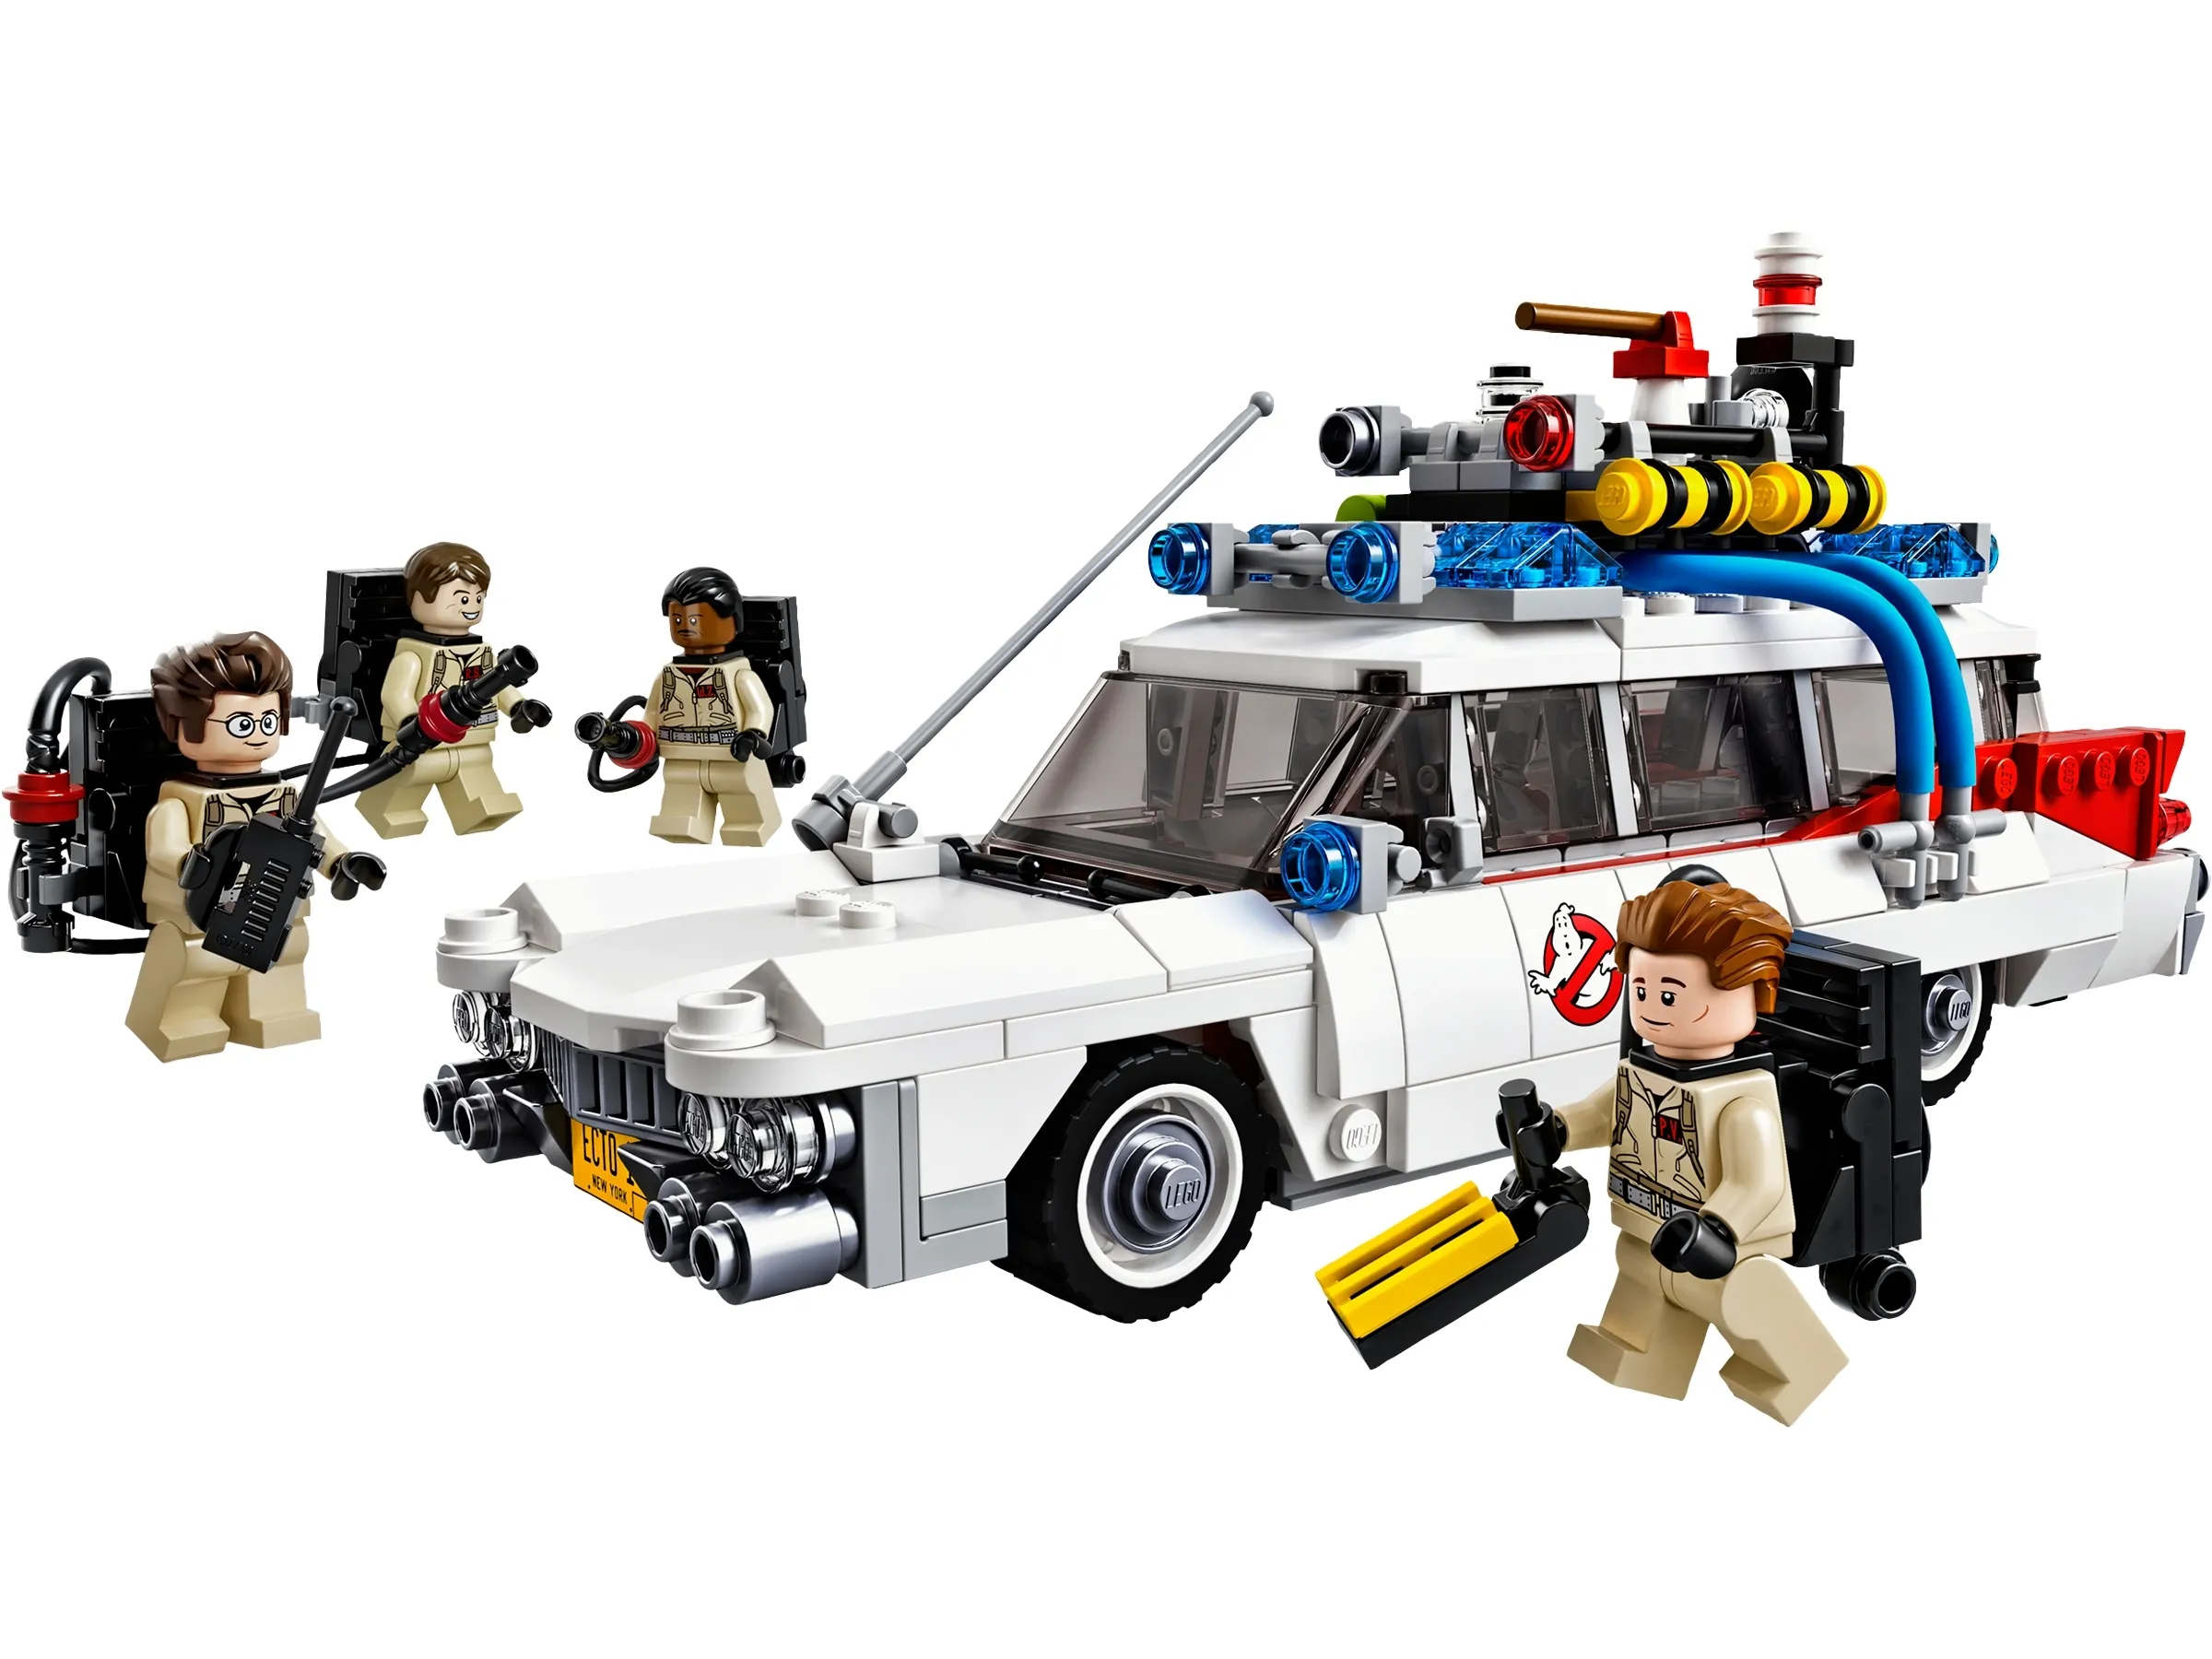 Ghostbusters' Ecto-1 Photo Gallery